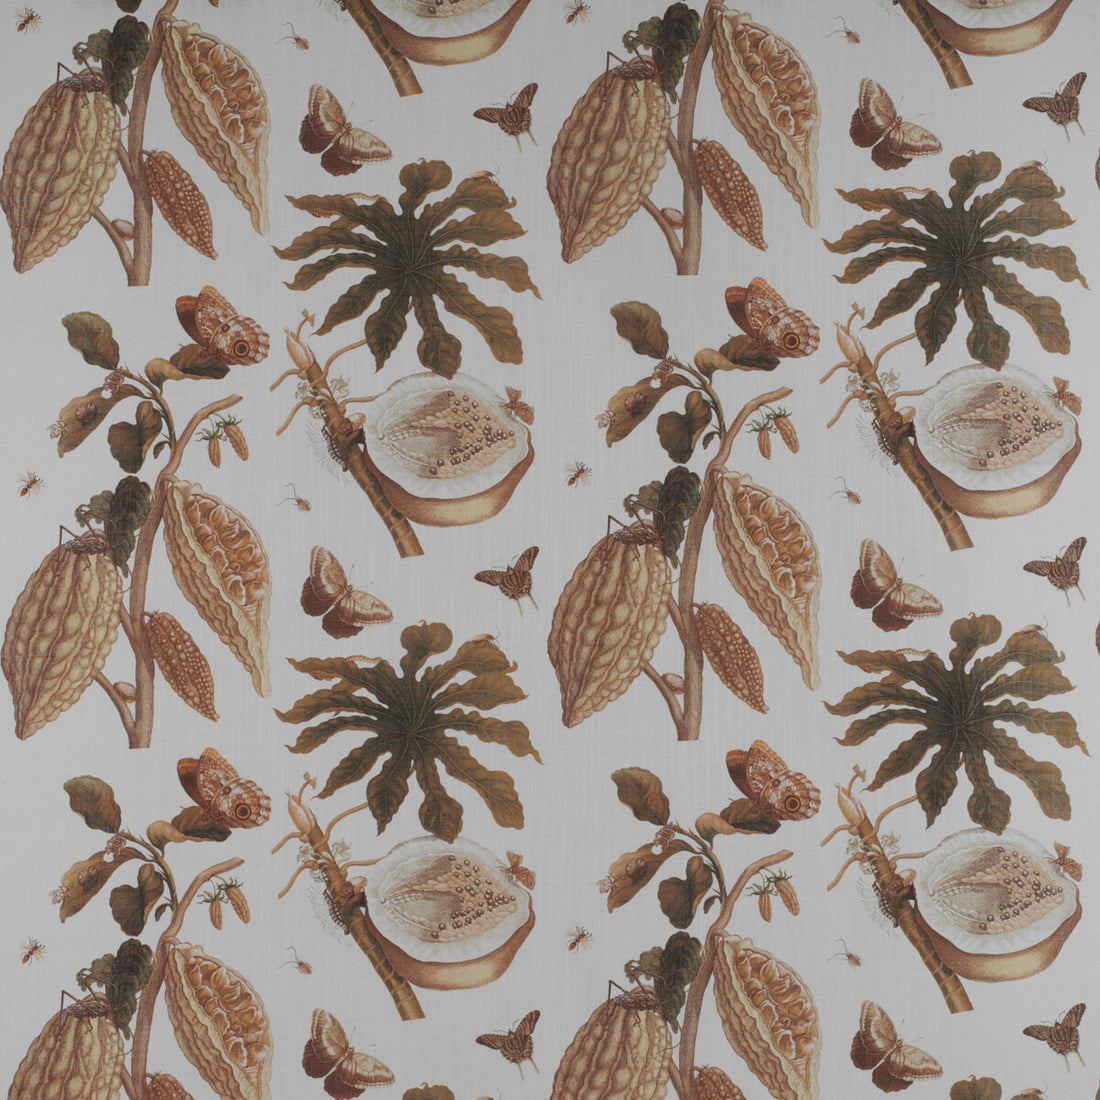 Retiro fabric in ocre color - pattern GDT5212.002.0 - by Gaston y Daniela in the Madrid collection